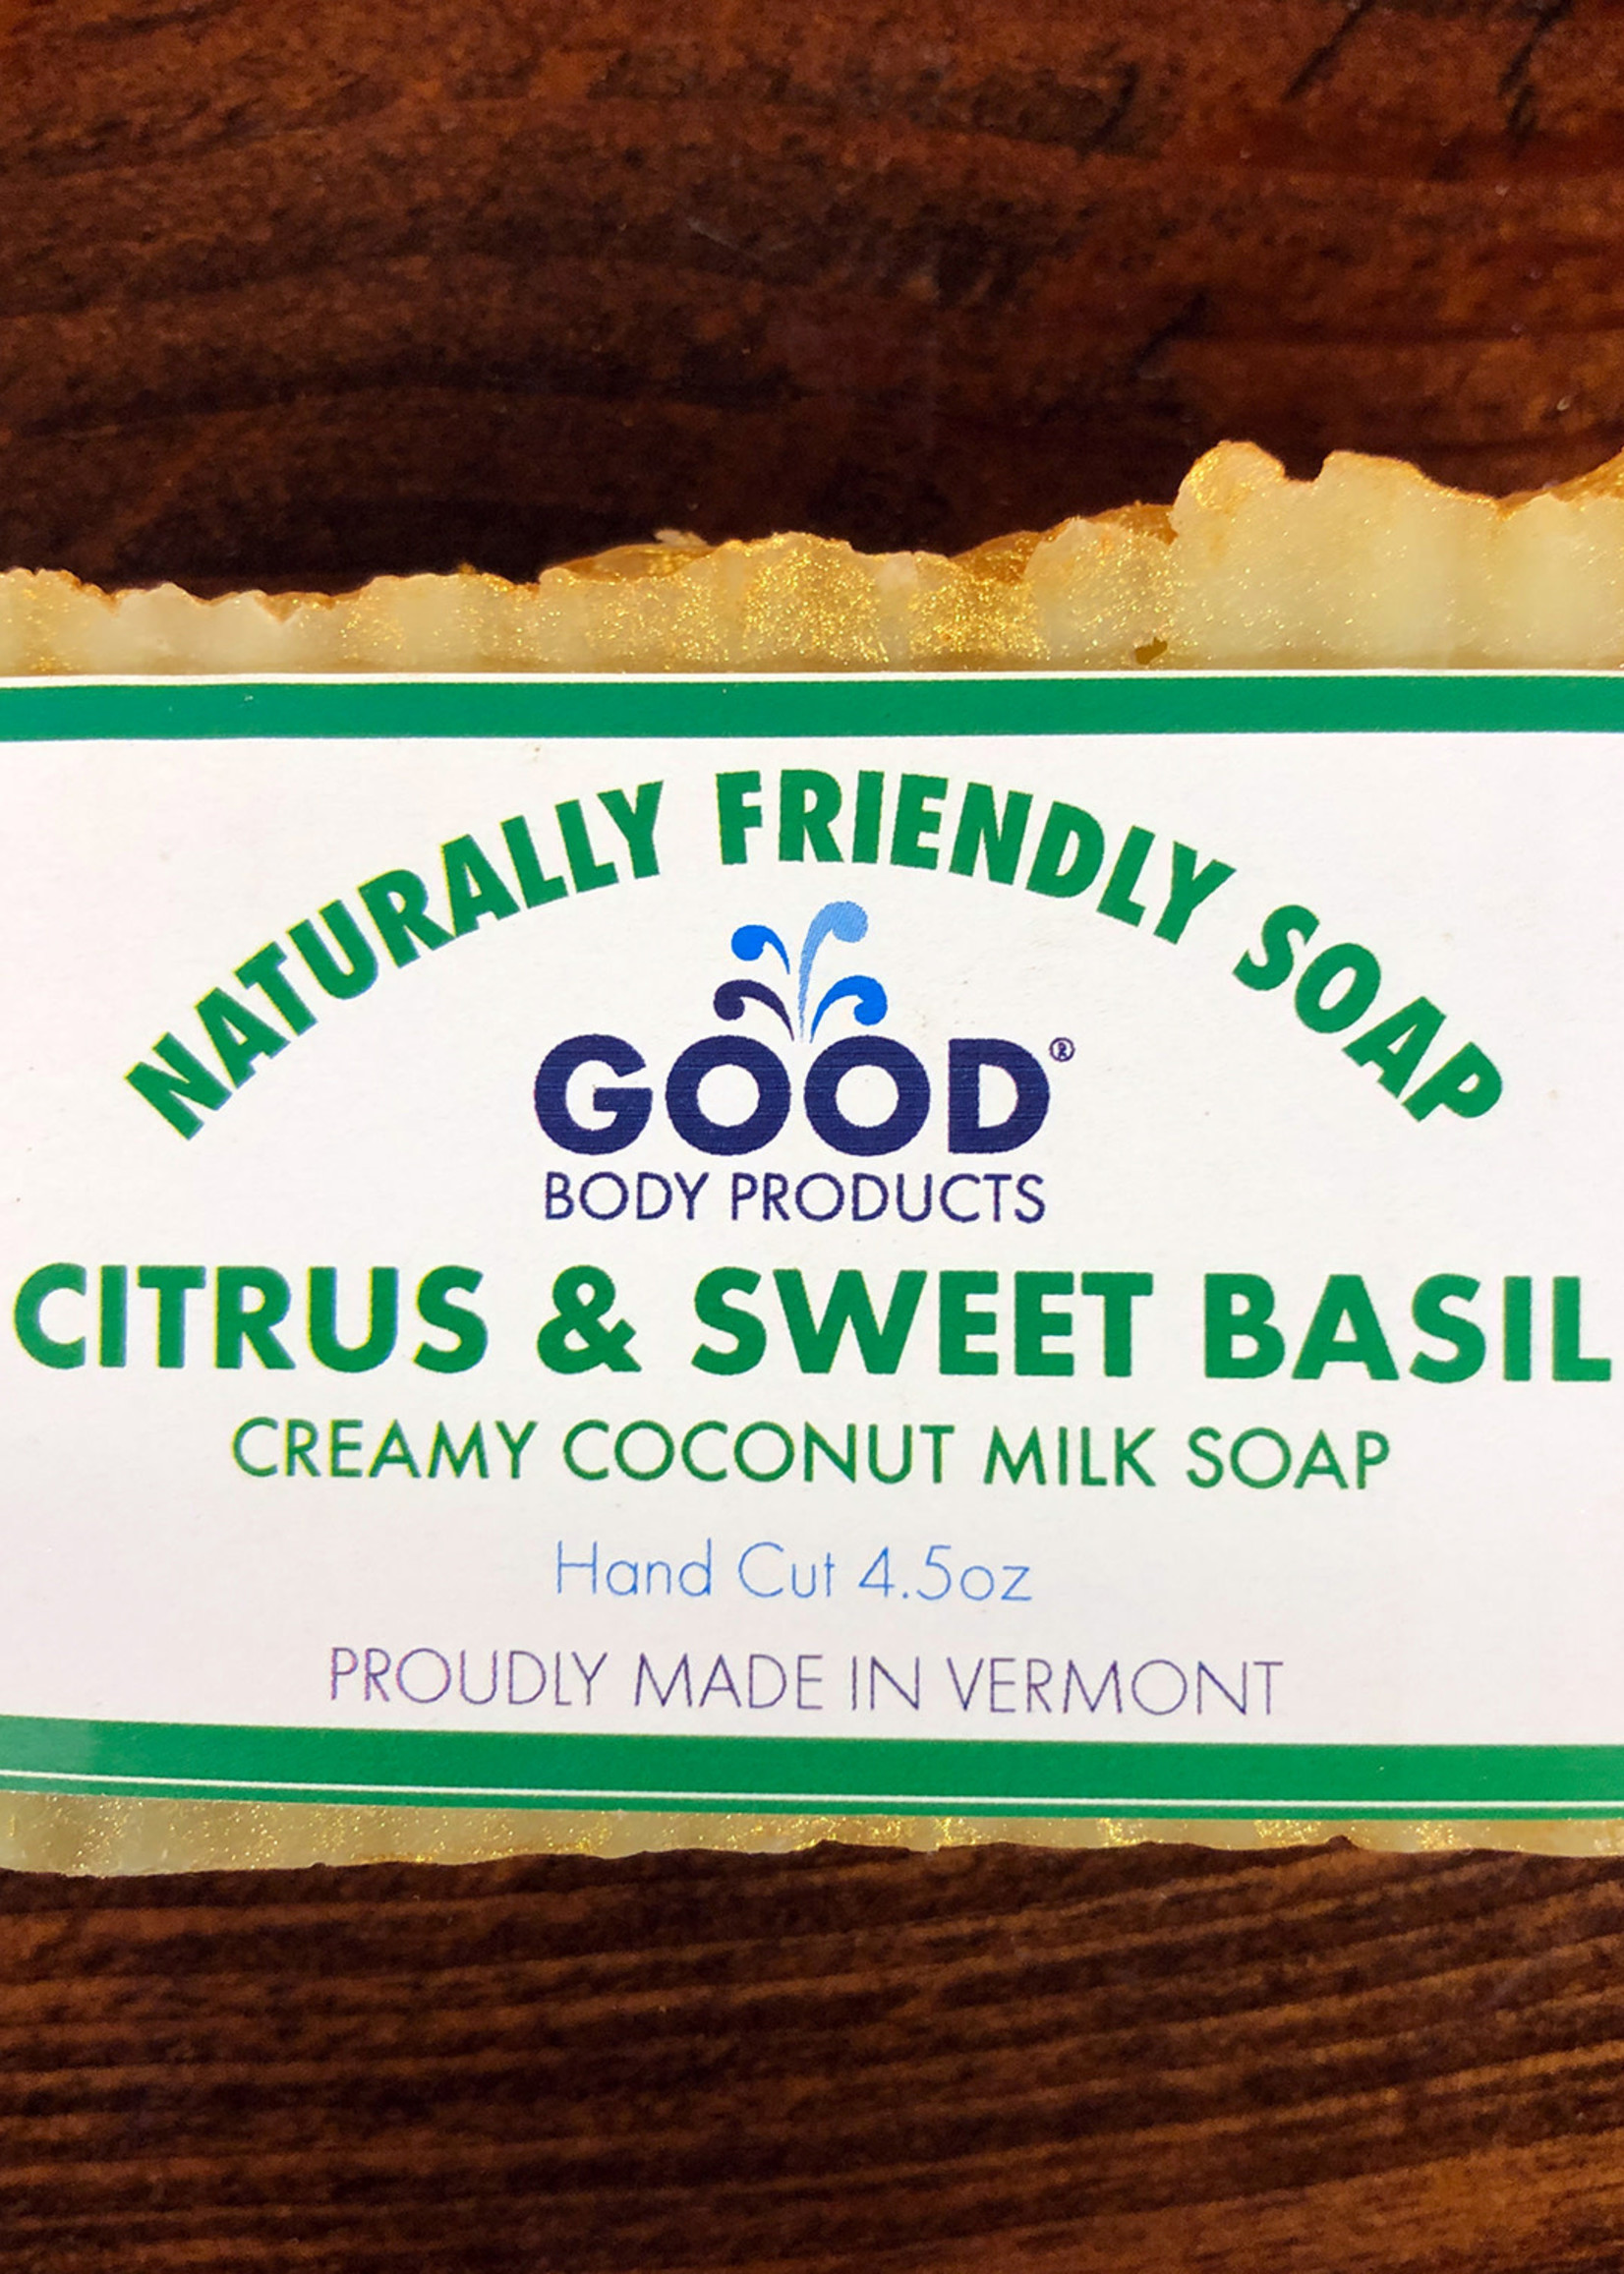 Good Body Products GBP, Citrus and Sweet Basil Coconut Milk Soap, 4.5oz